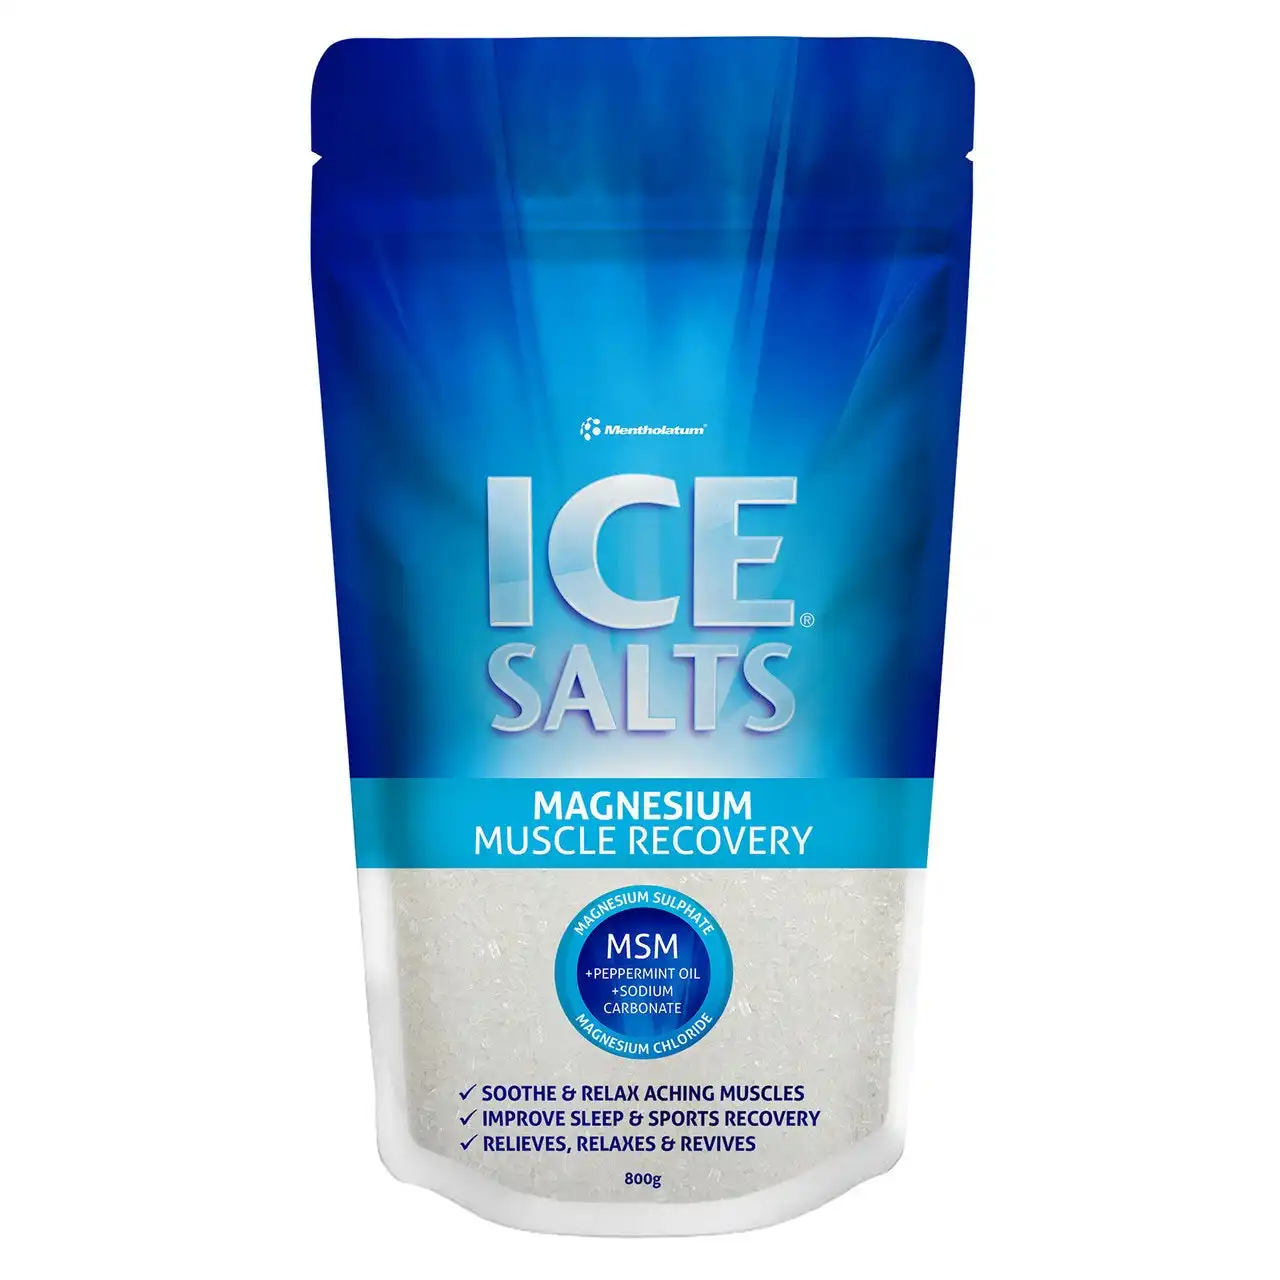 Mentholatum Magnesium Muscle Recovery Ice Salts 800g